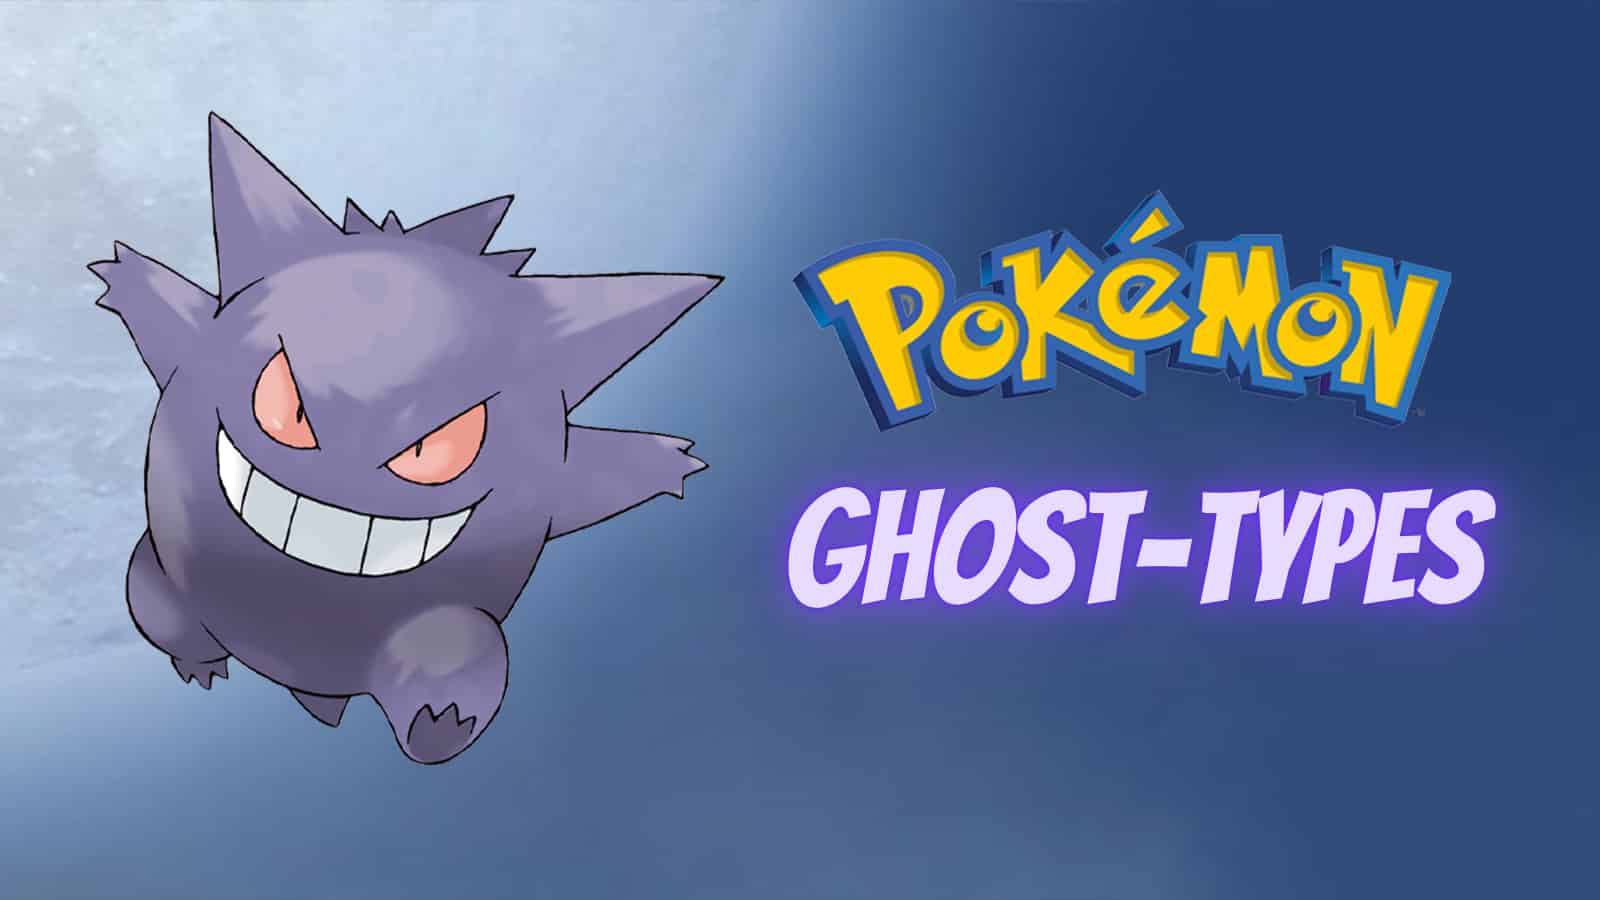 Gengar as one of the best Ghost-type Pokemon